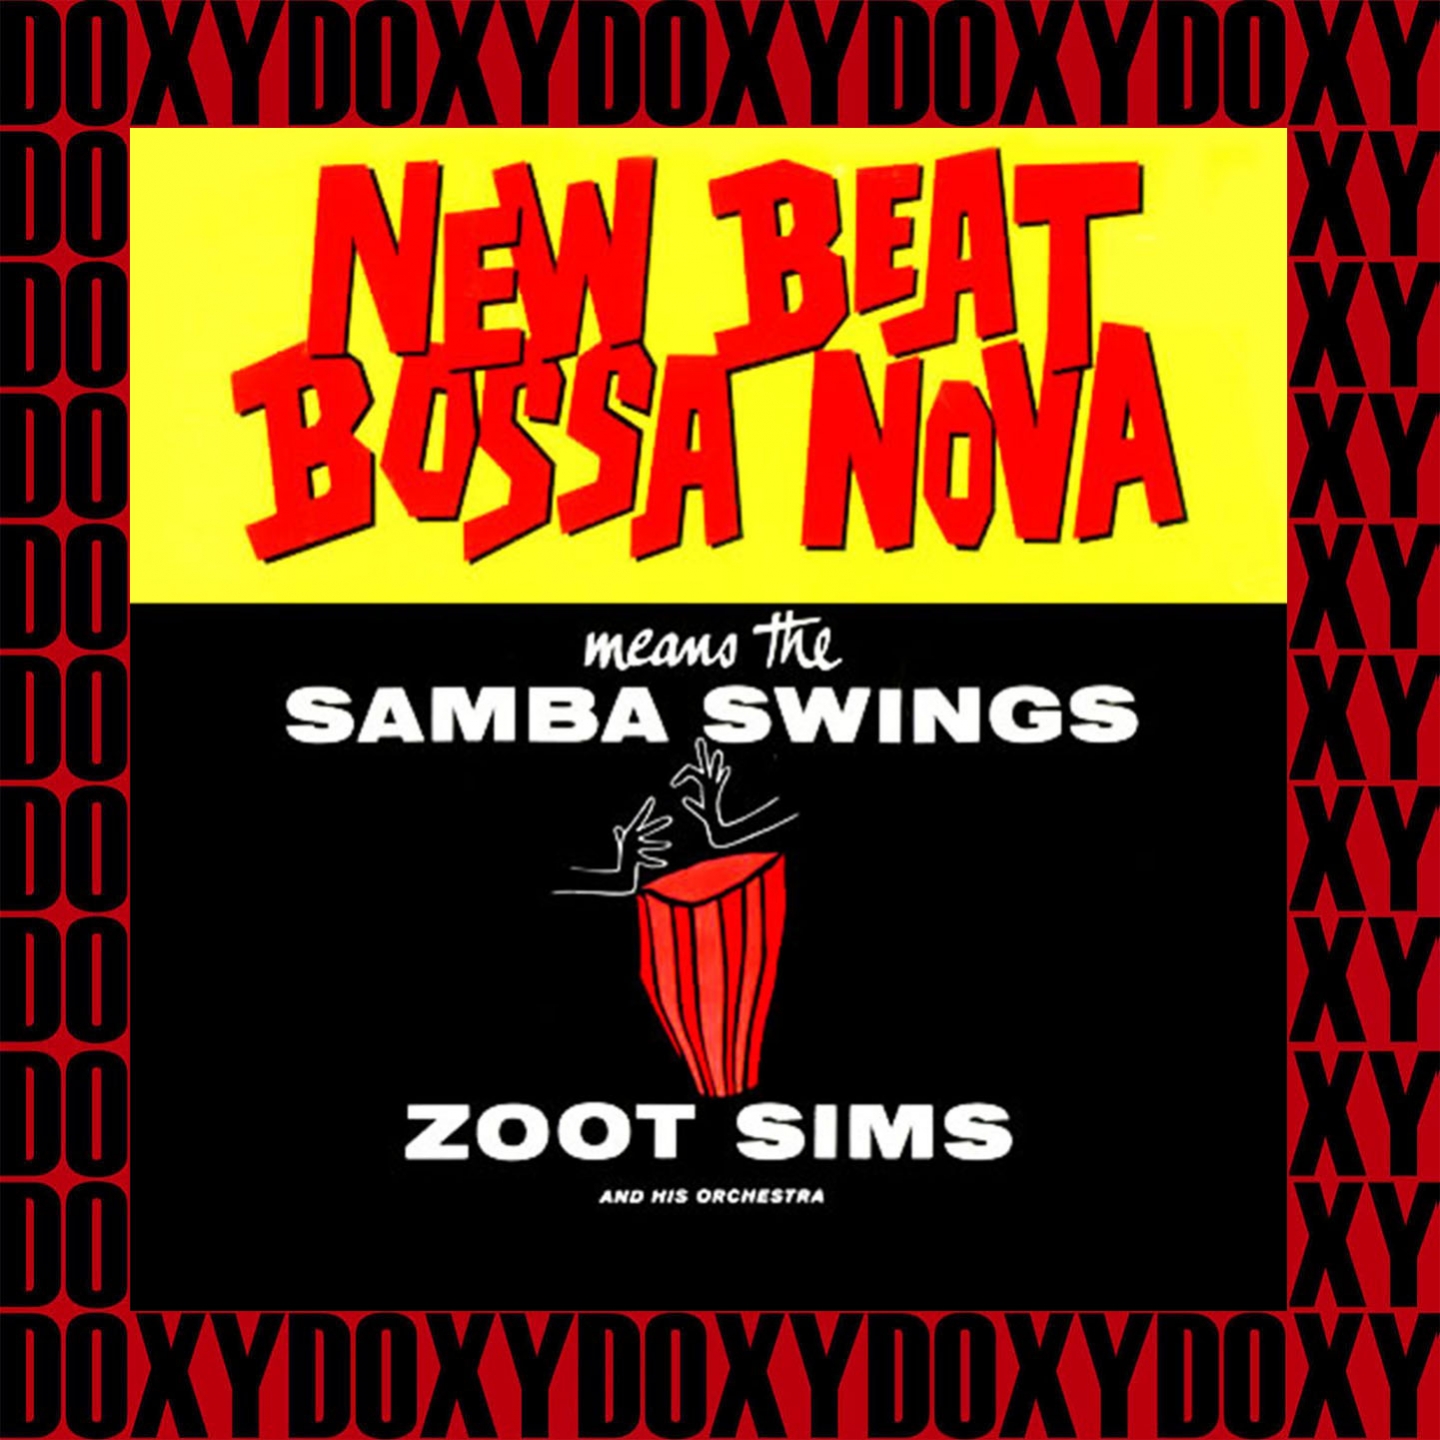 New Beat Bossa Nova Vol. 1 (Expanded, Remastered Version) (Doxy Collection)